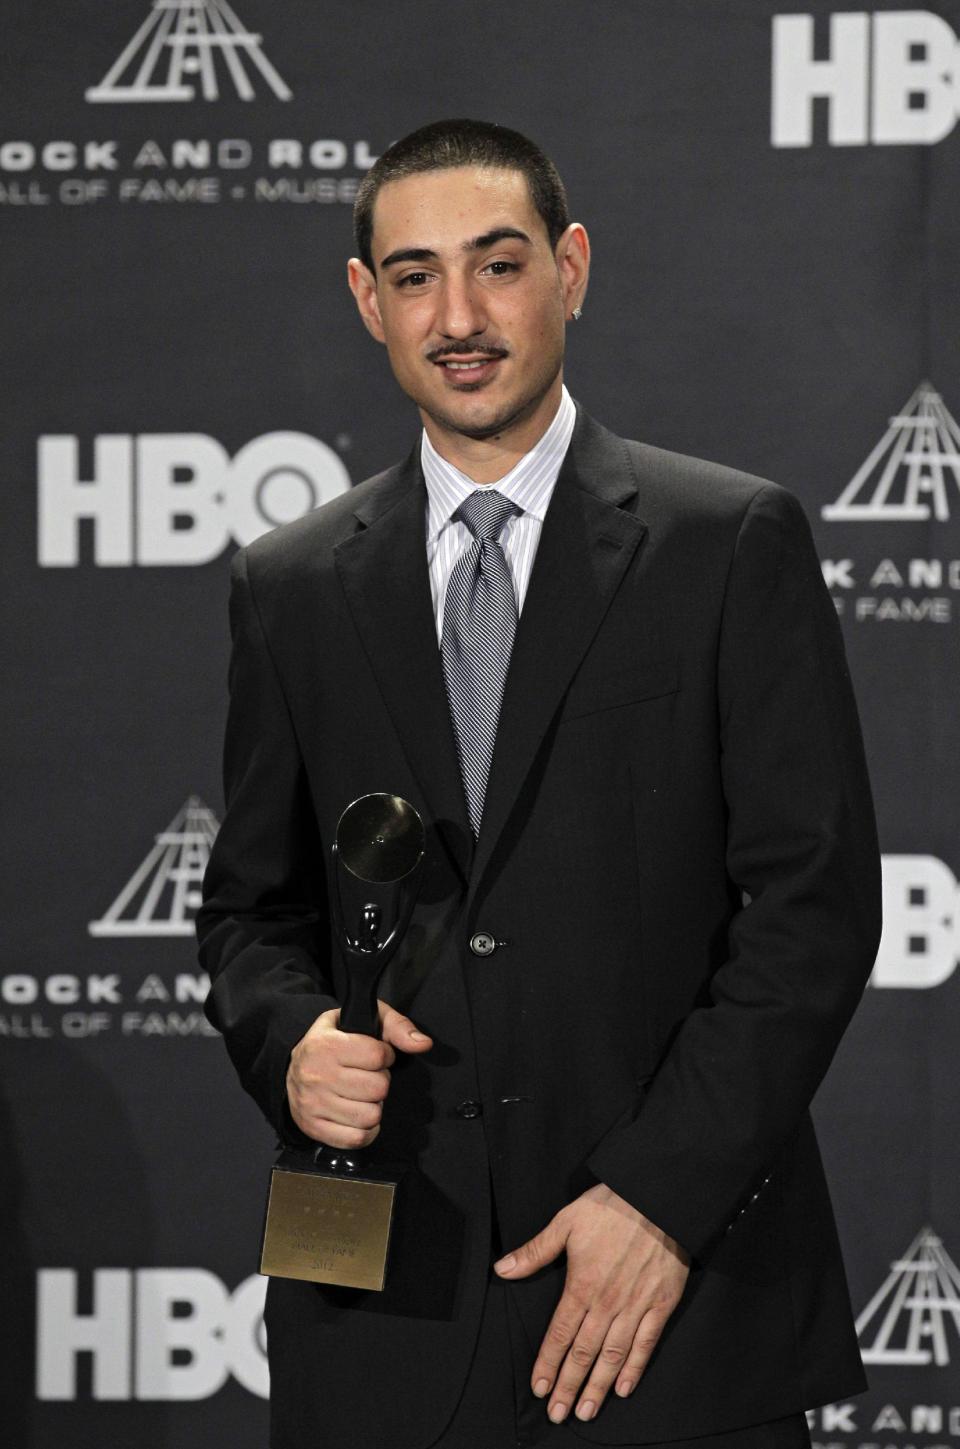 Gil Bianchini appears in the press room after accepting induction into the Rock and Roll Hall of Fame for his late mother, Laura Nyro, Friday, April 13, 2012, in Cleveland. (AP Photo/Amy Sancetta)